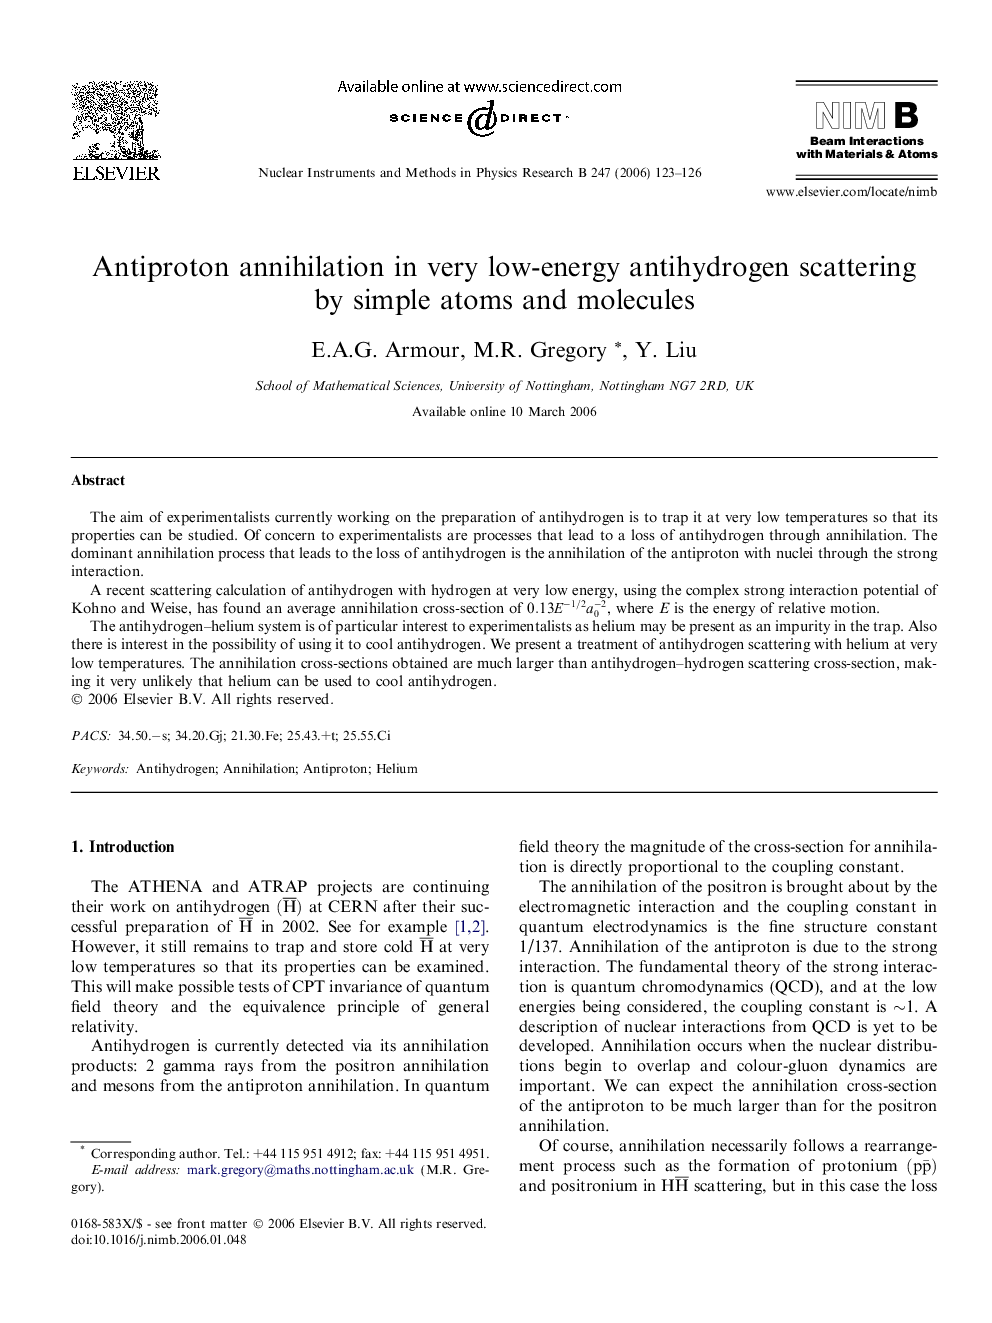 Antiproton annihilation in very low-energy antihydrogen scattering by simple atoms and molecules